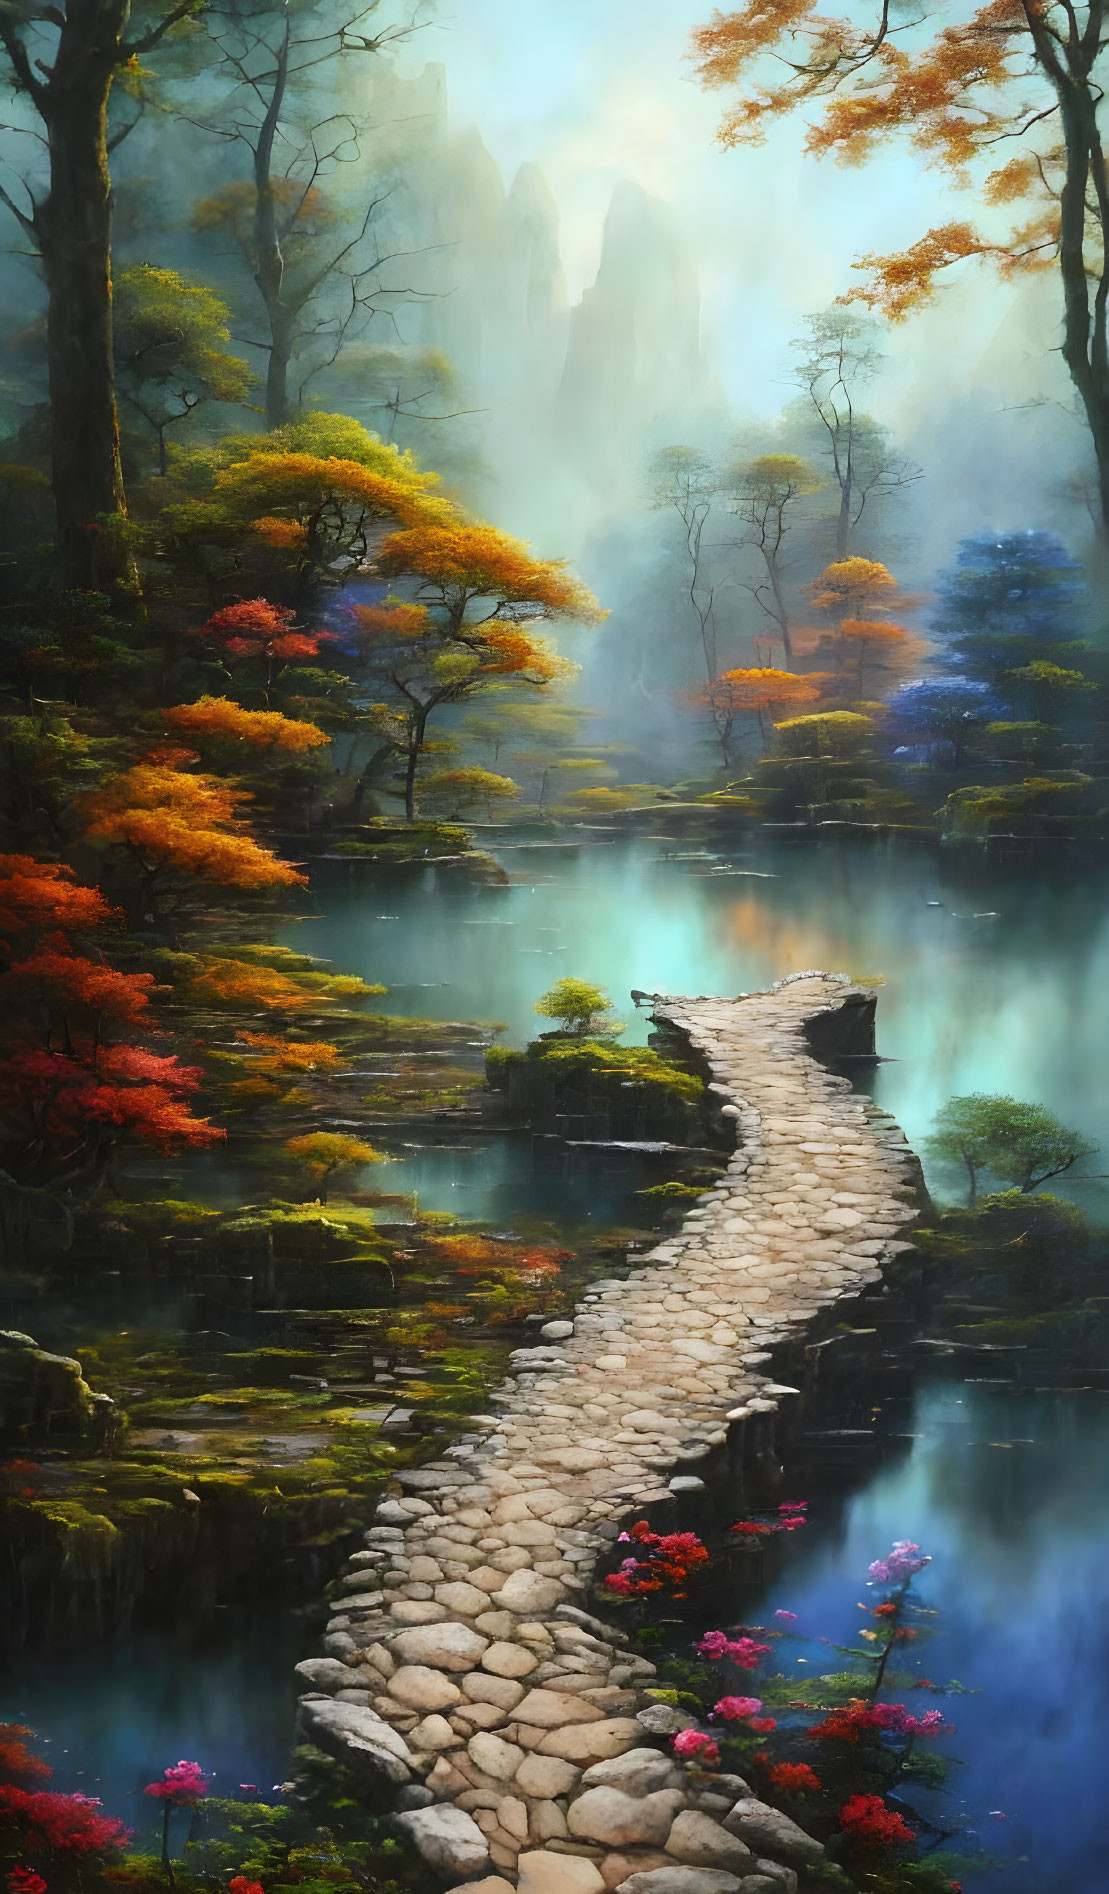 Tranquil forest scene with cobblestone path, misty lake, autumn trees, and shr